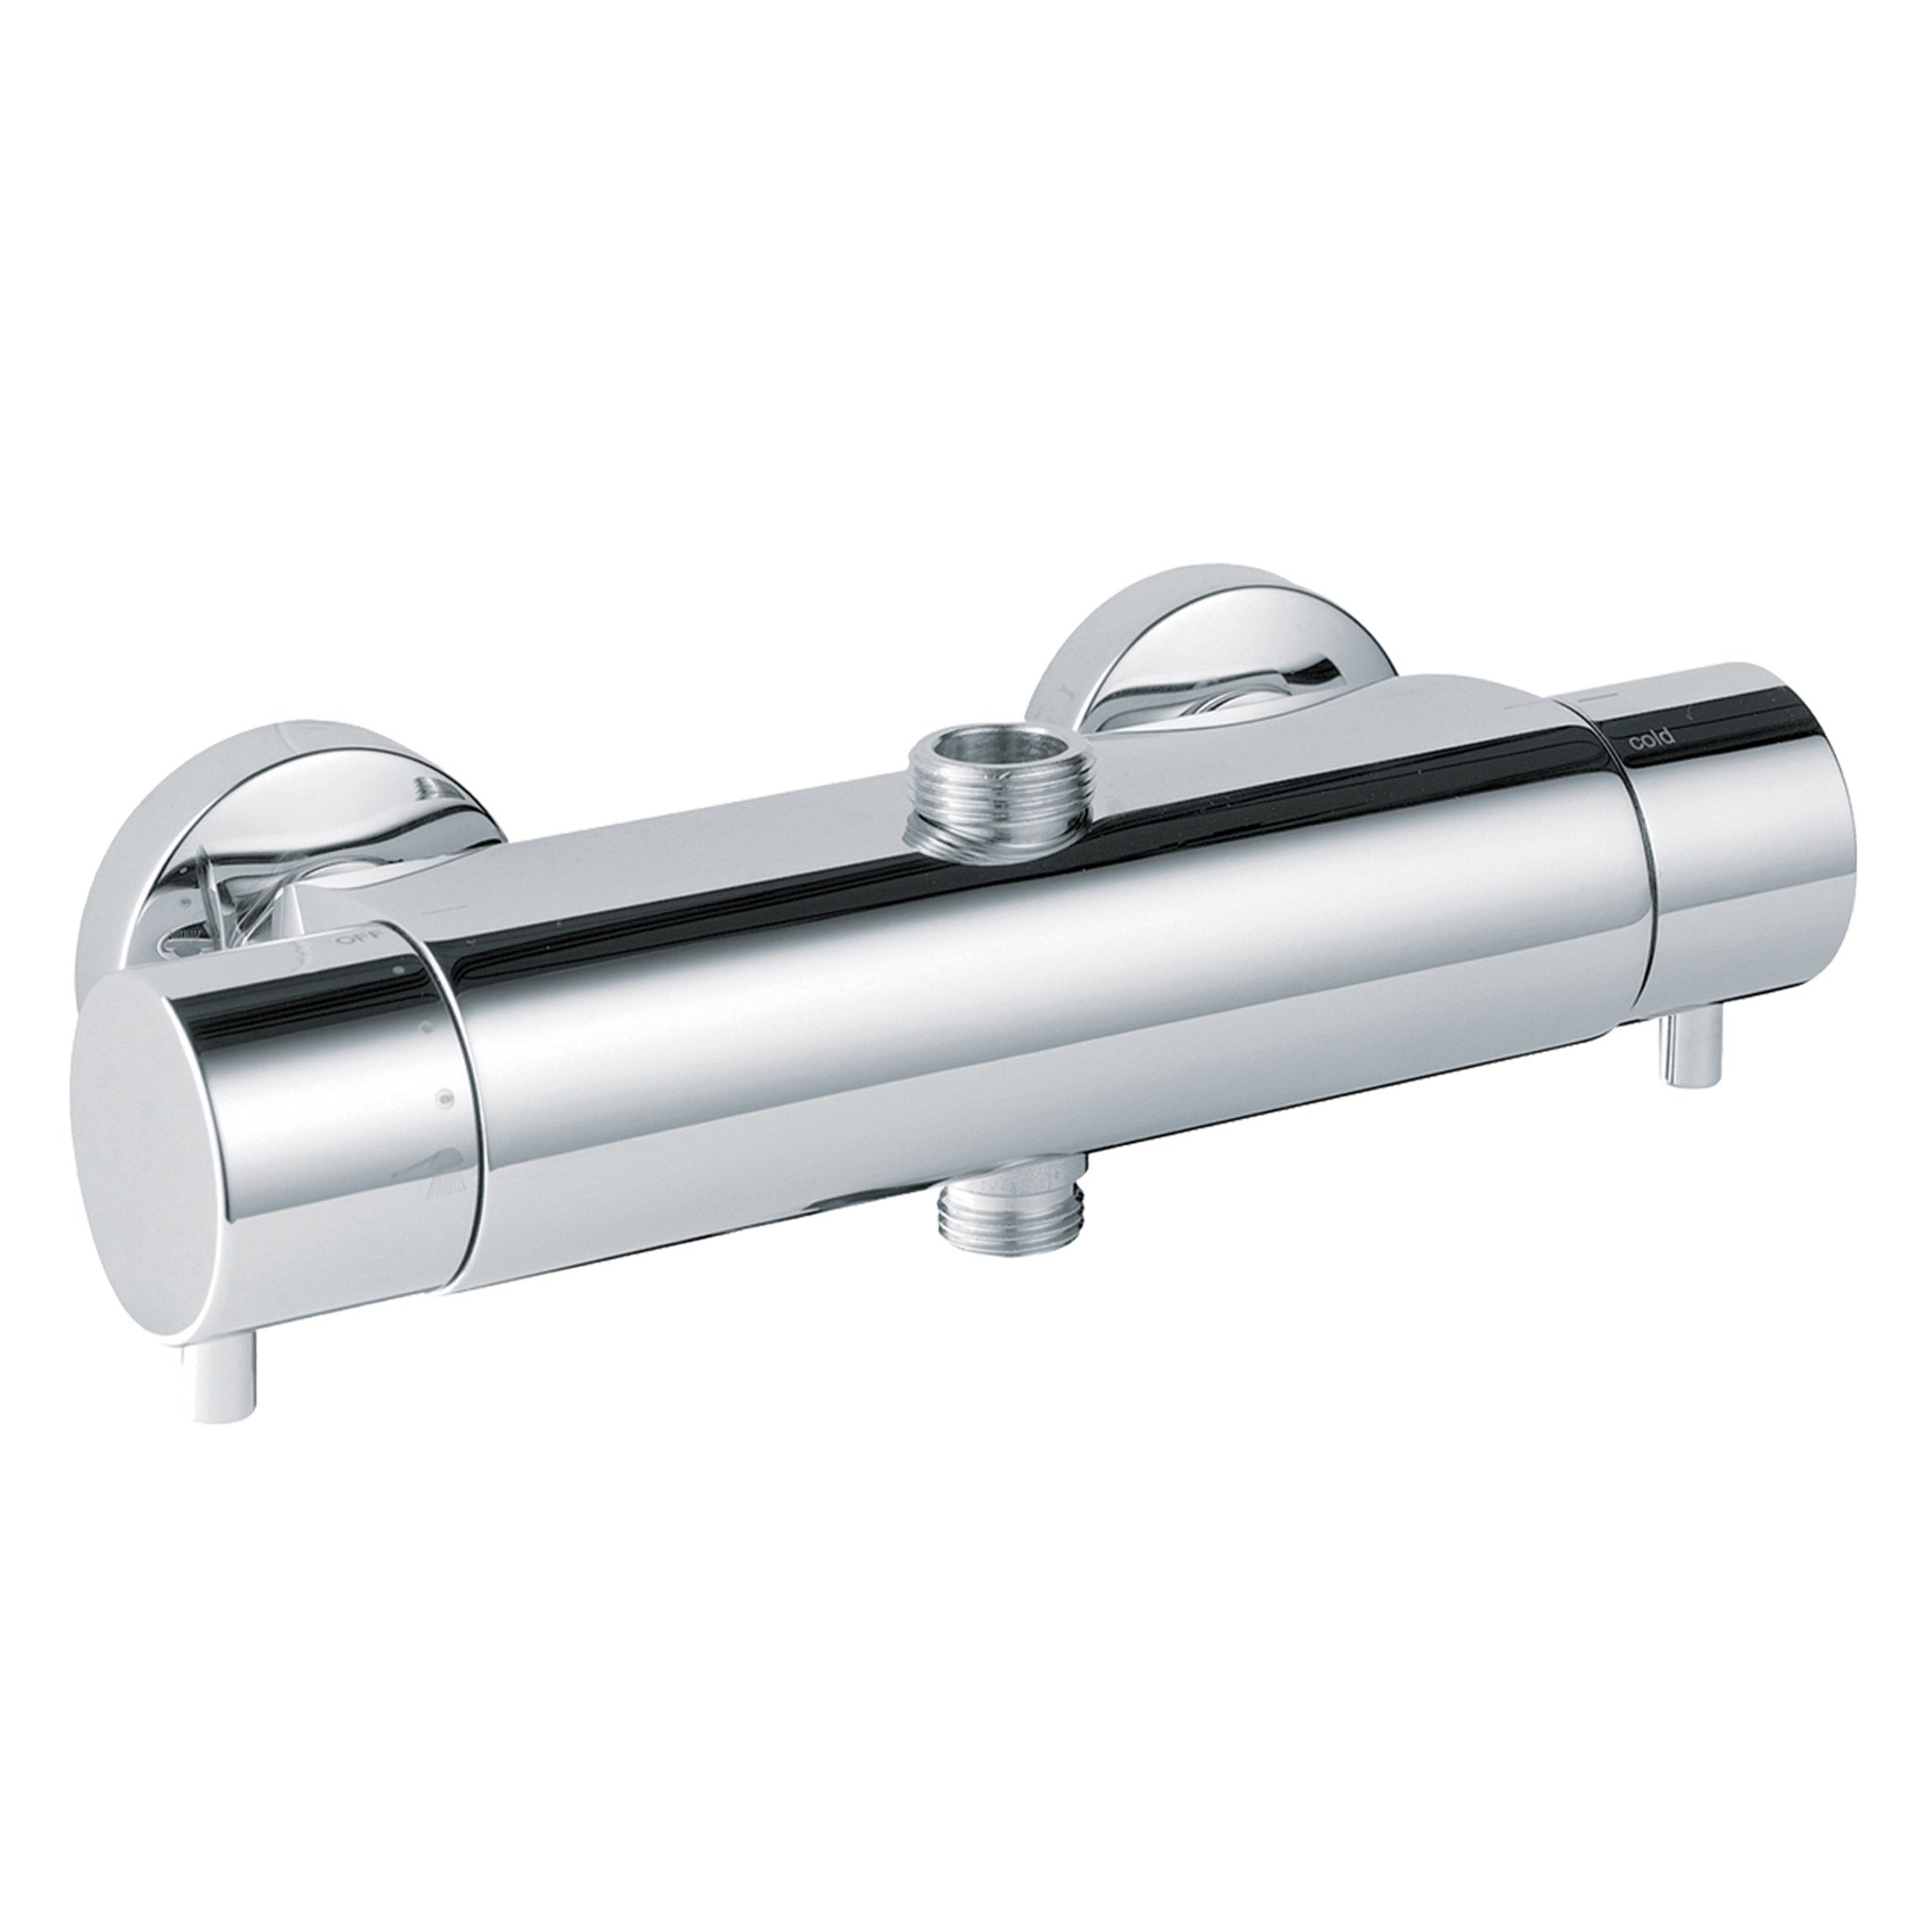 JTP Florence Thermostatic Exposed 2 Outlet 2 Controls Bar Shower Valve